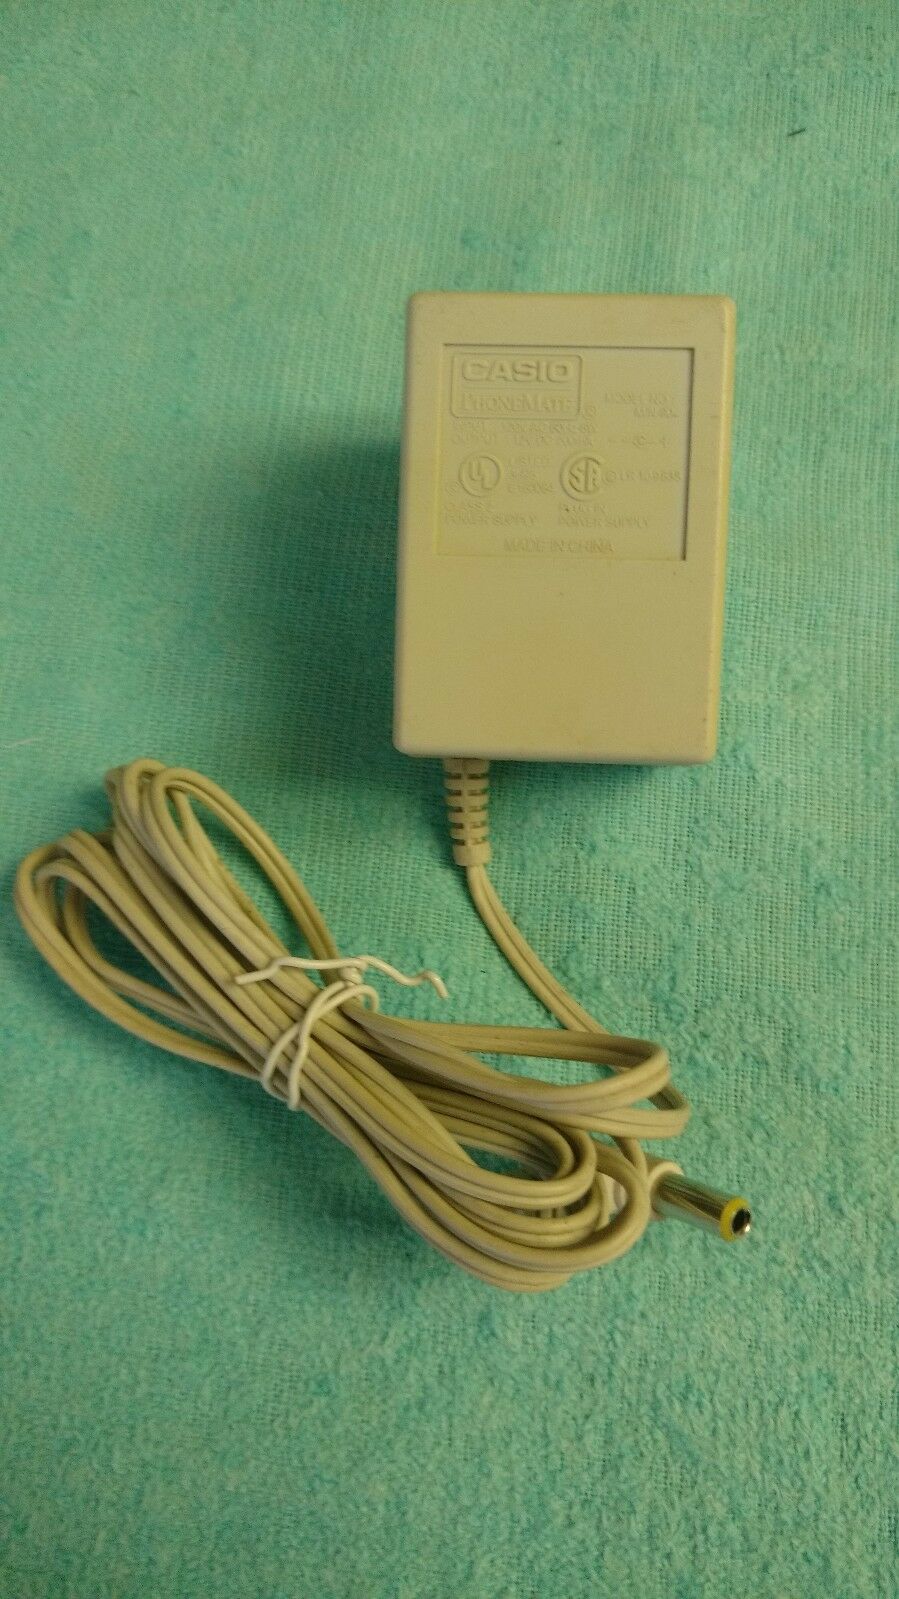 Casio PhoneMate AC Power Supply Adapter M/N-90 12V DC 200mA 5.5 x 2.1 White Model: M/N-90 Output Voltage: 12V Type: